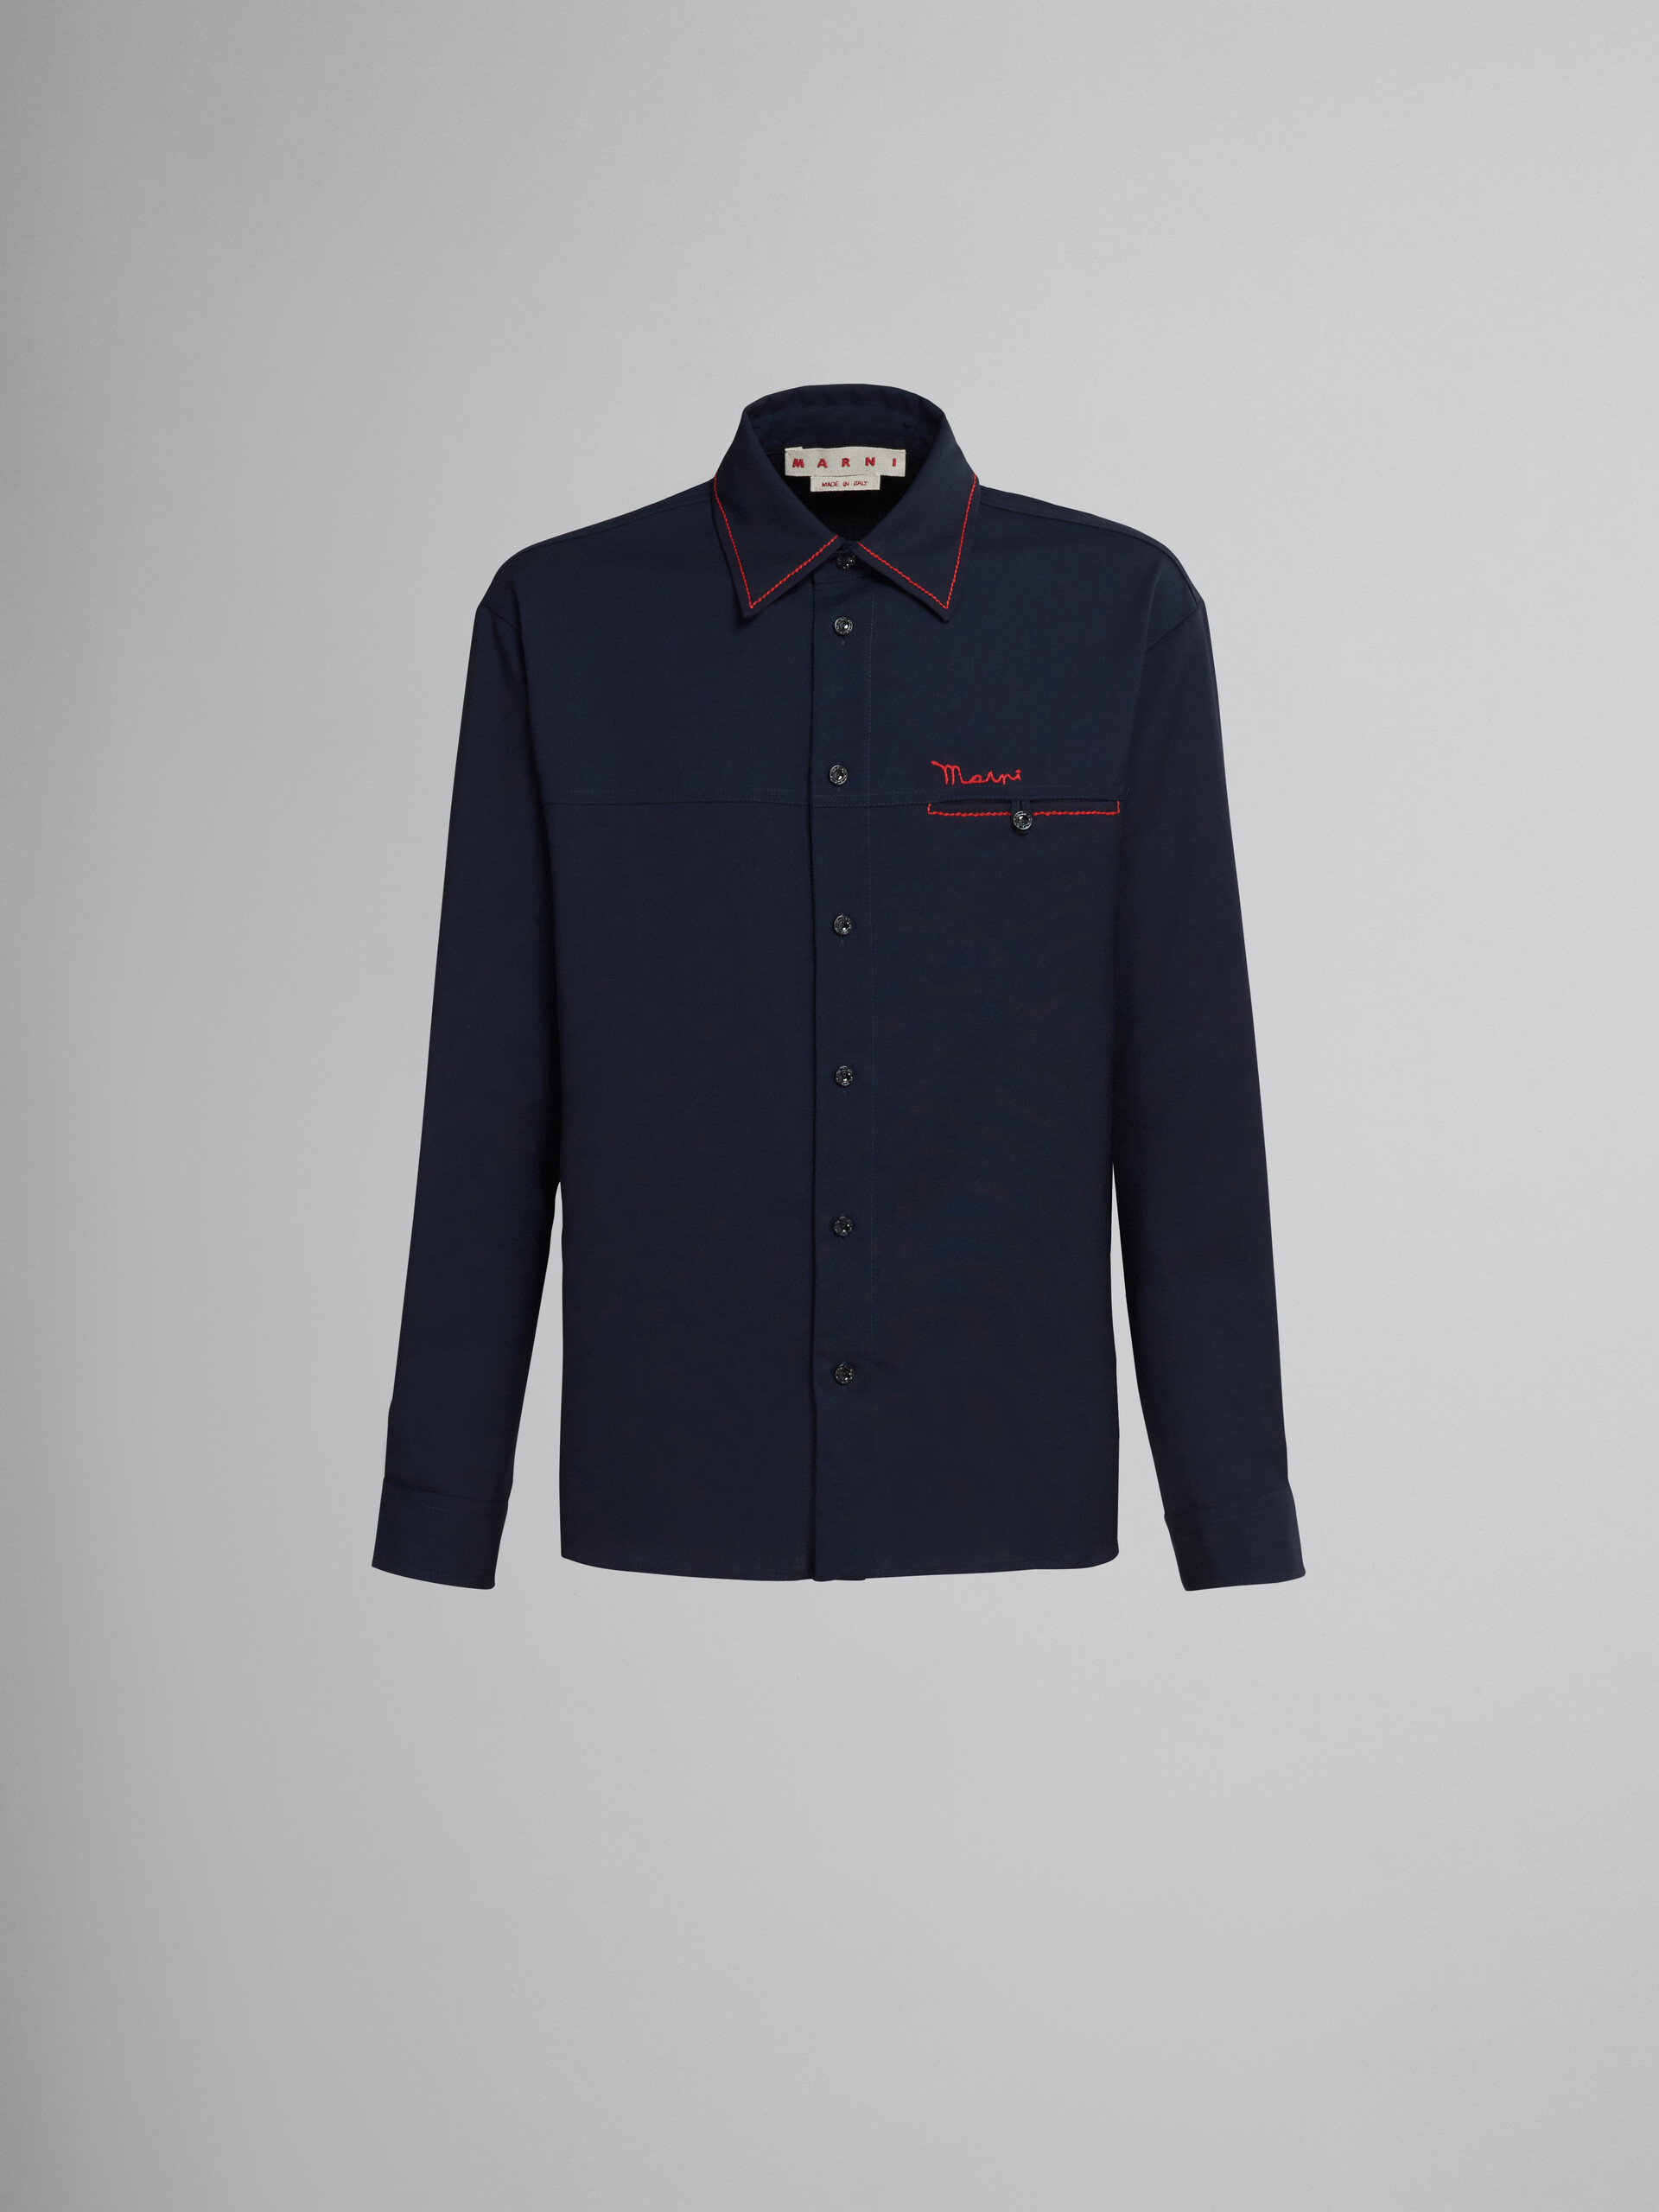 Blue ligh wool shirt with embroidery - Shirts - Image 1